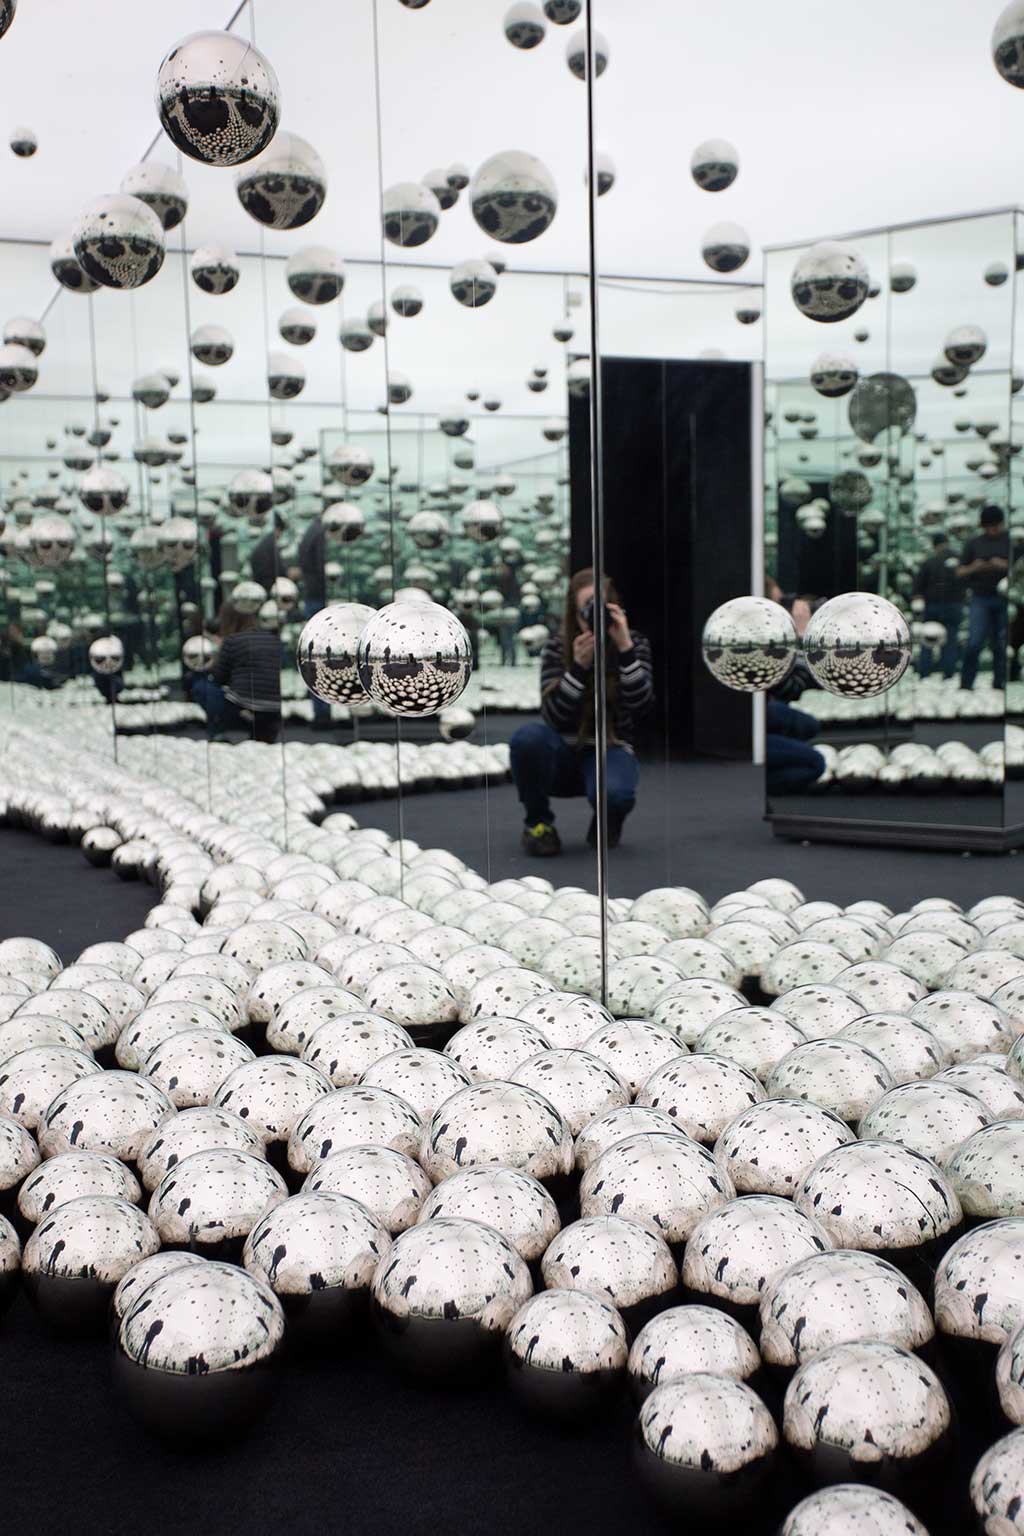 drive-swim-fly-chicago-illinois-wndr-museum-selfie-experience-family-fun-yayoi-kusama-lets-survive-forever-mirror-room-balls-spheres-2